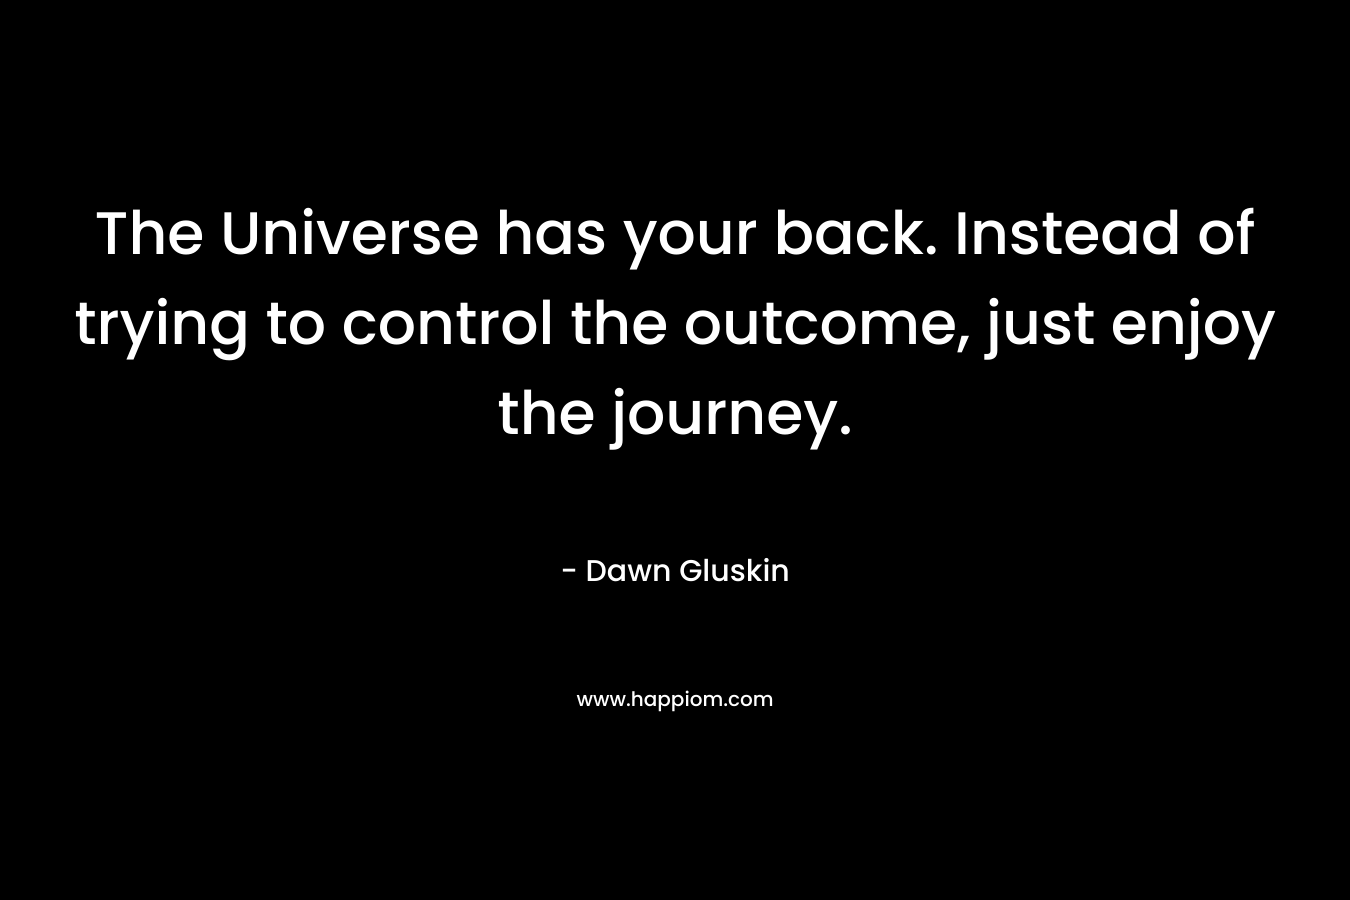 The Universe has your back. Instead of trying to control the outcome, just enjoy the journey. – Dawn Gluskin